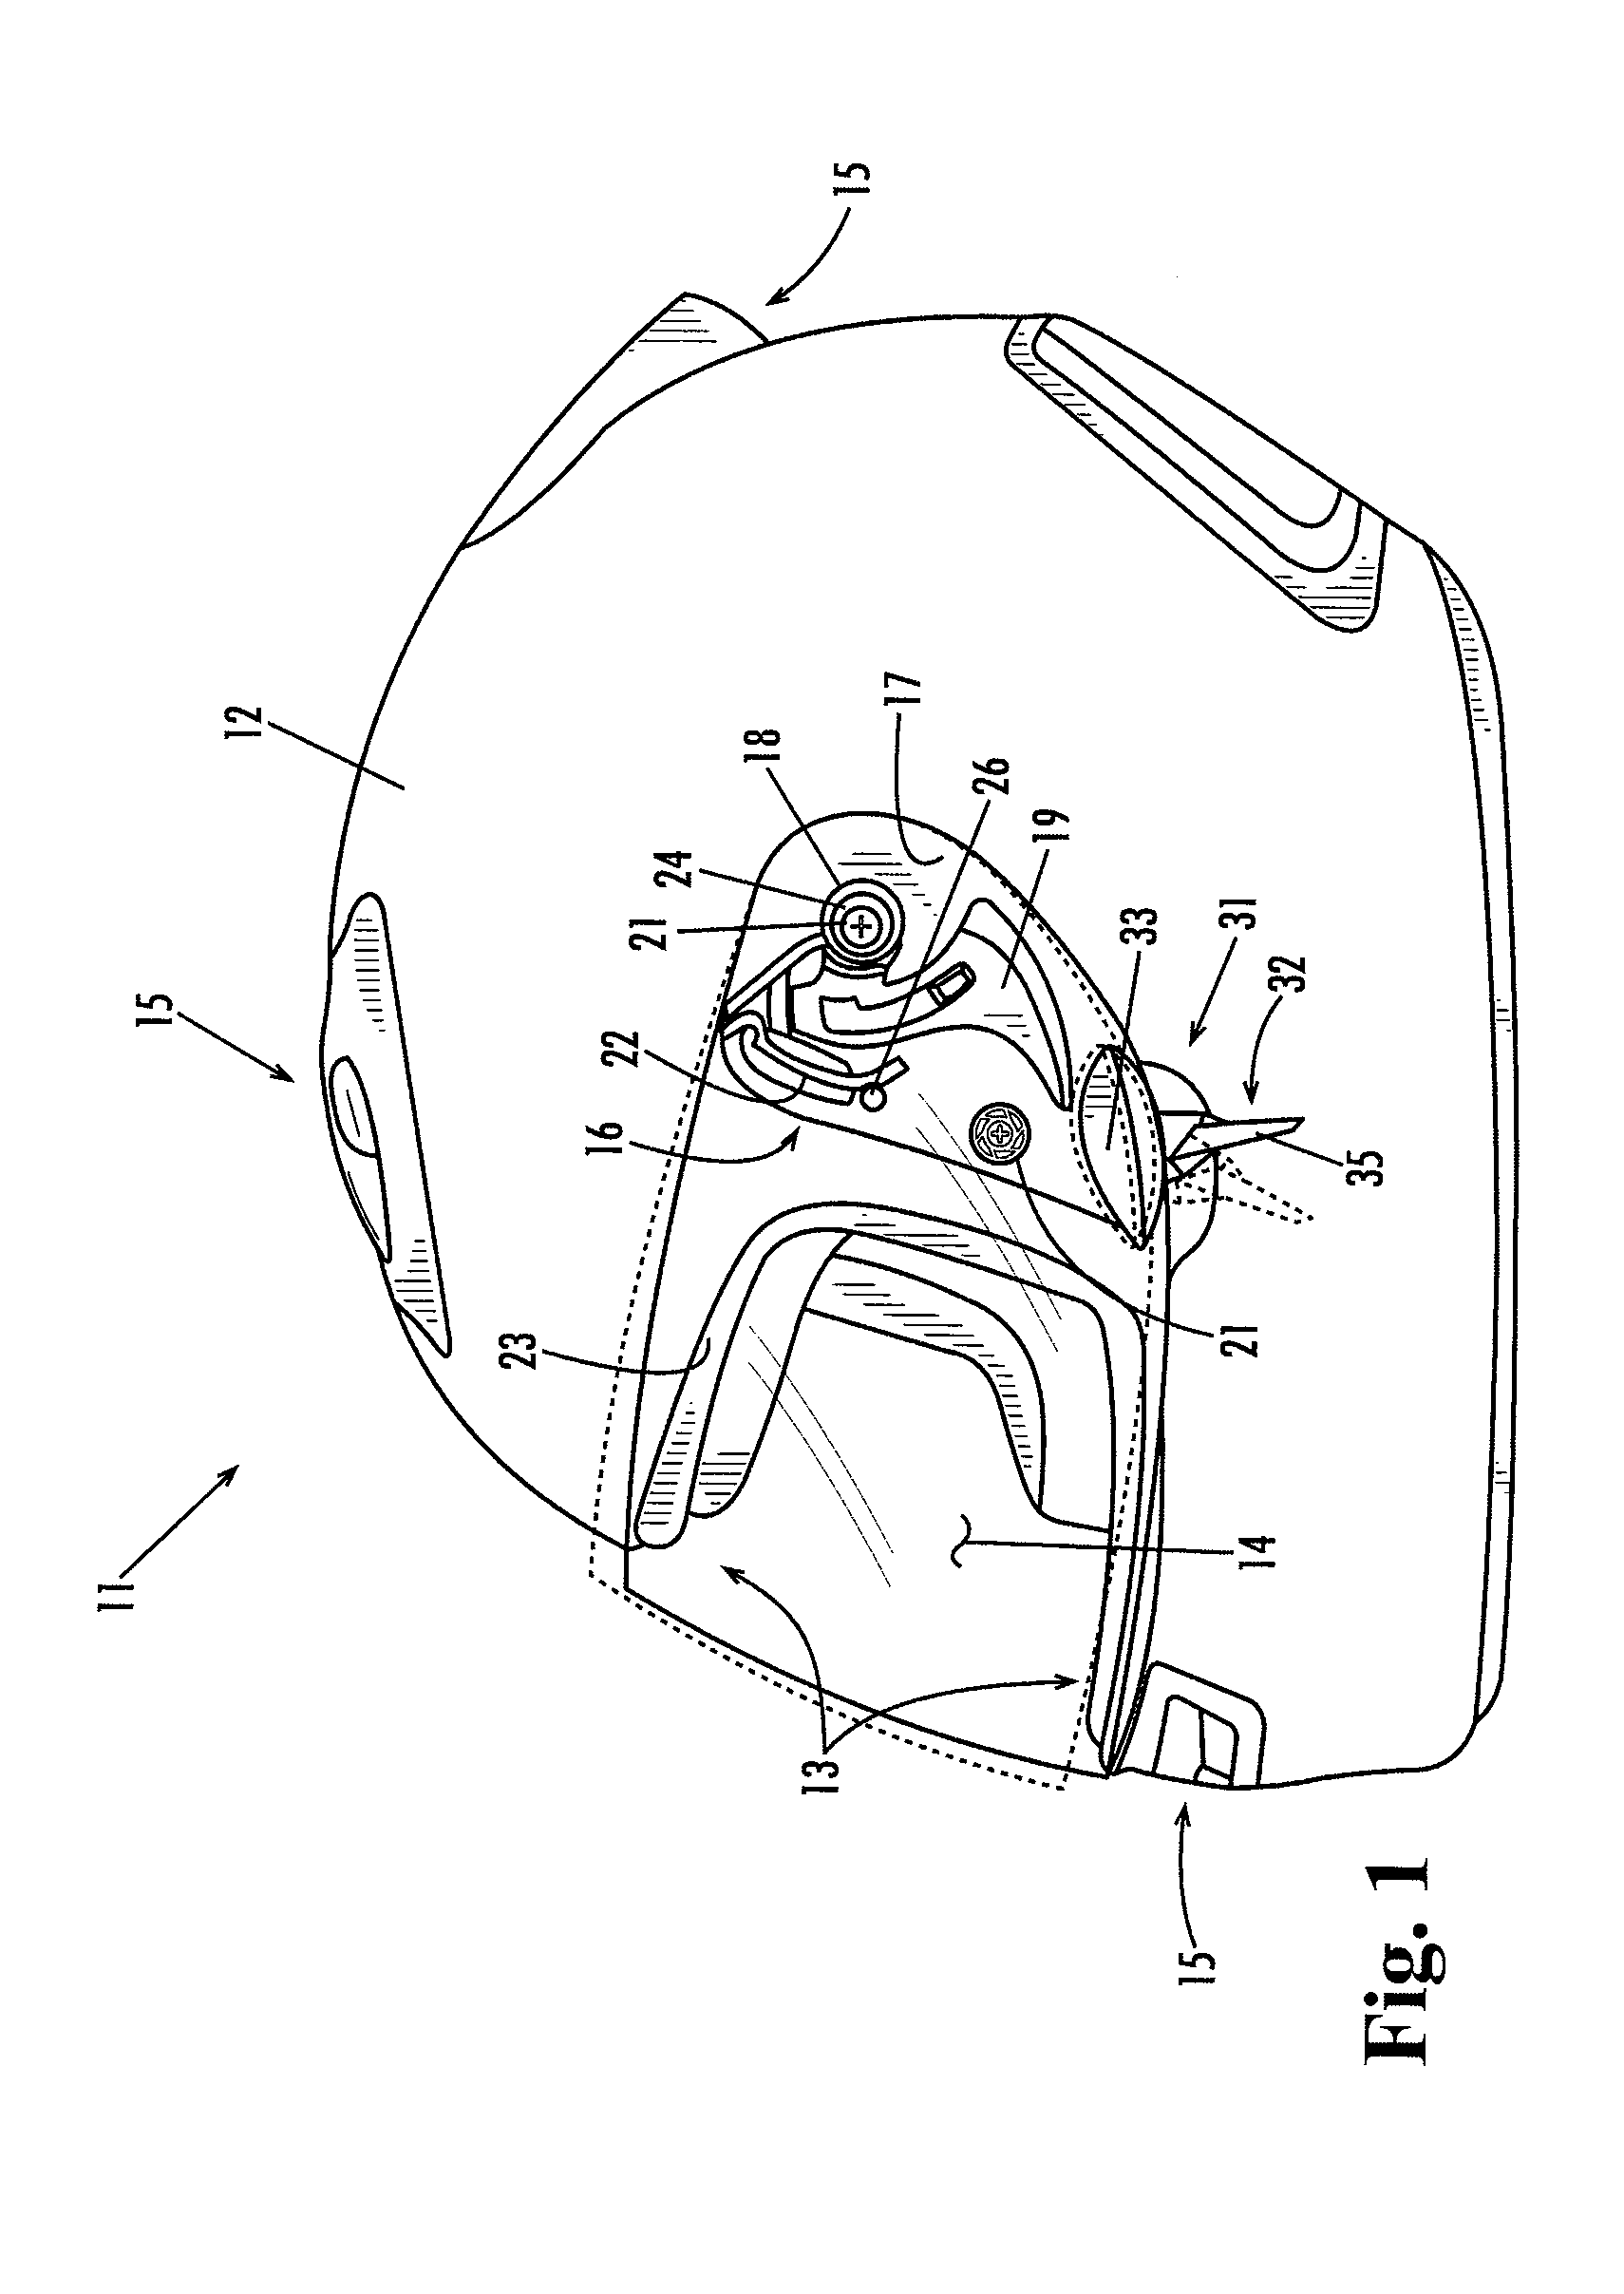 Helmet with Improved Shield Mount and Precision Shield Control